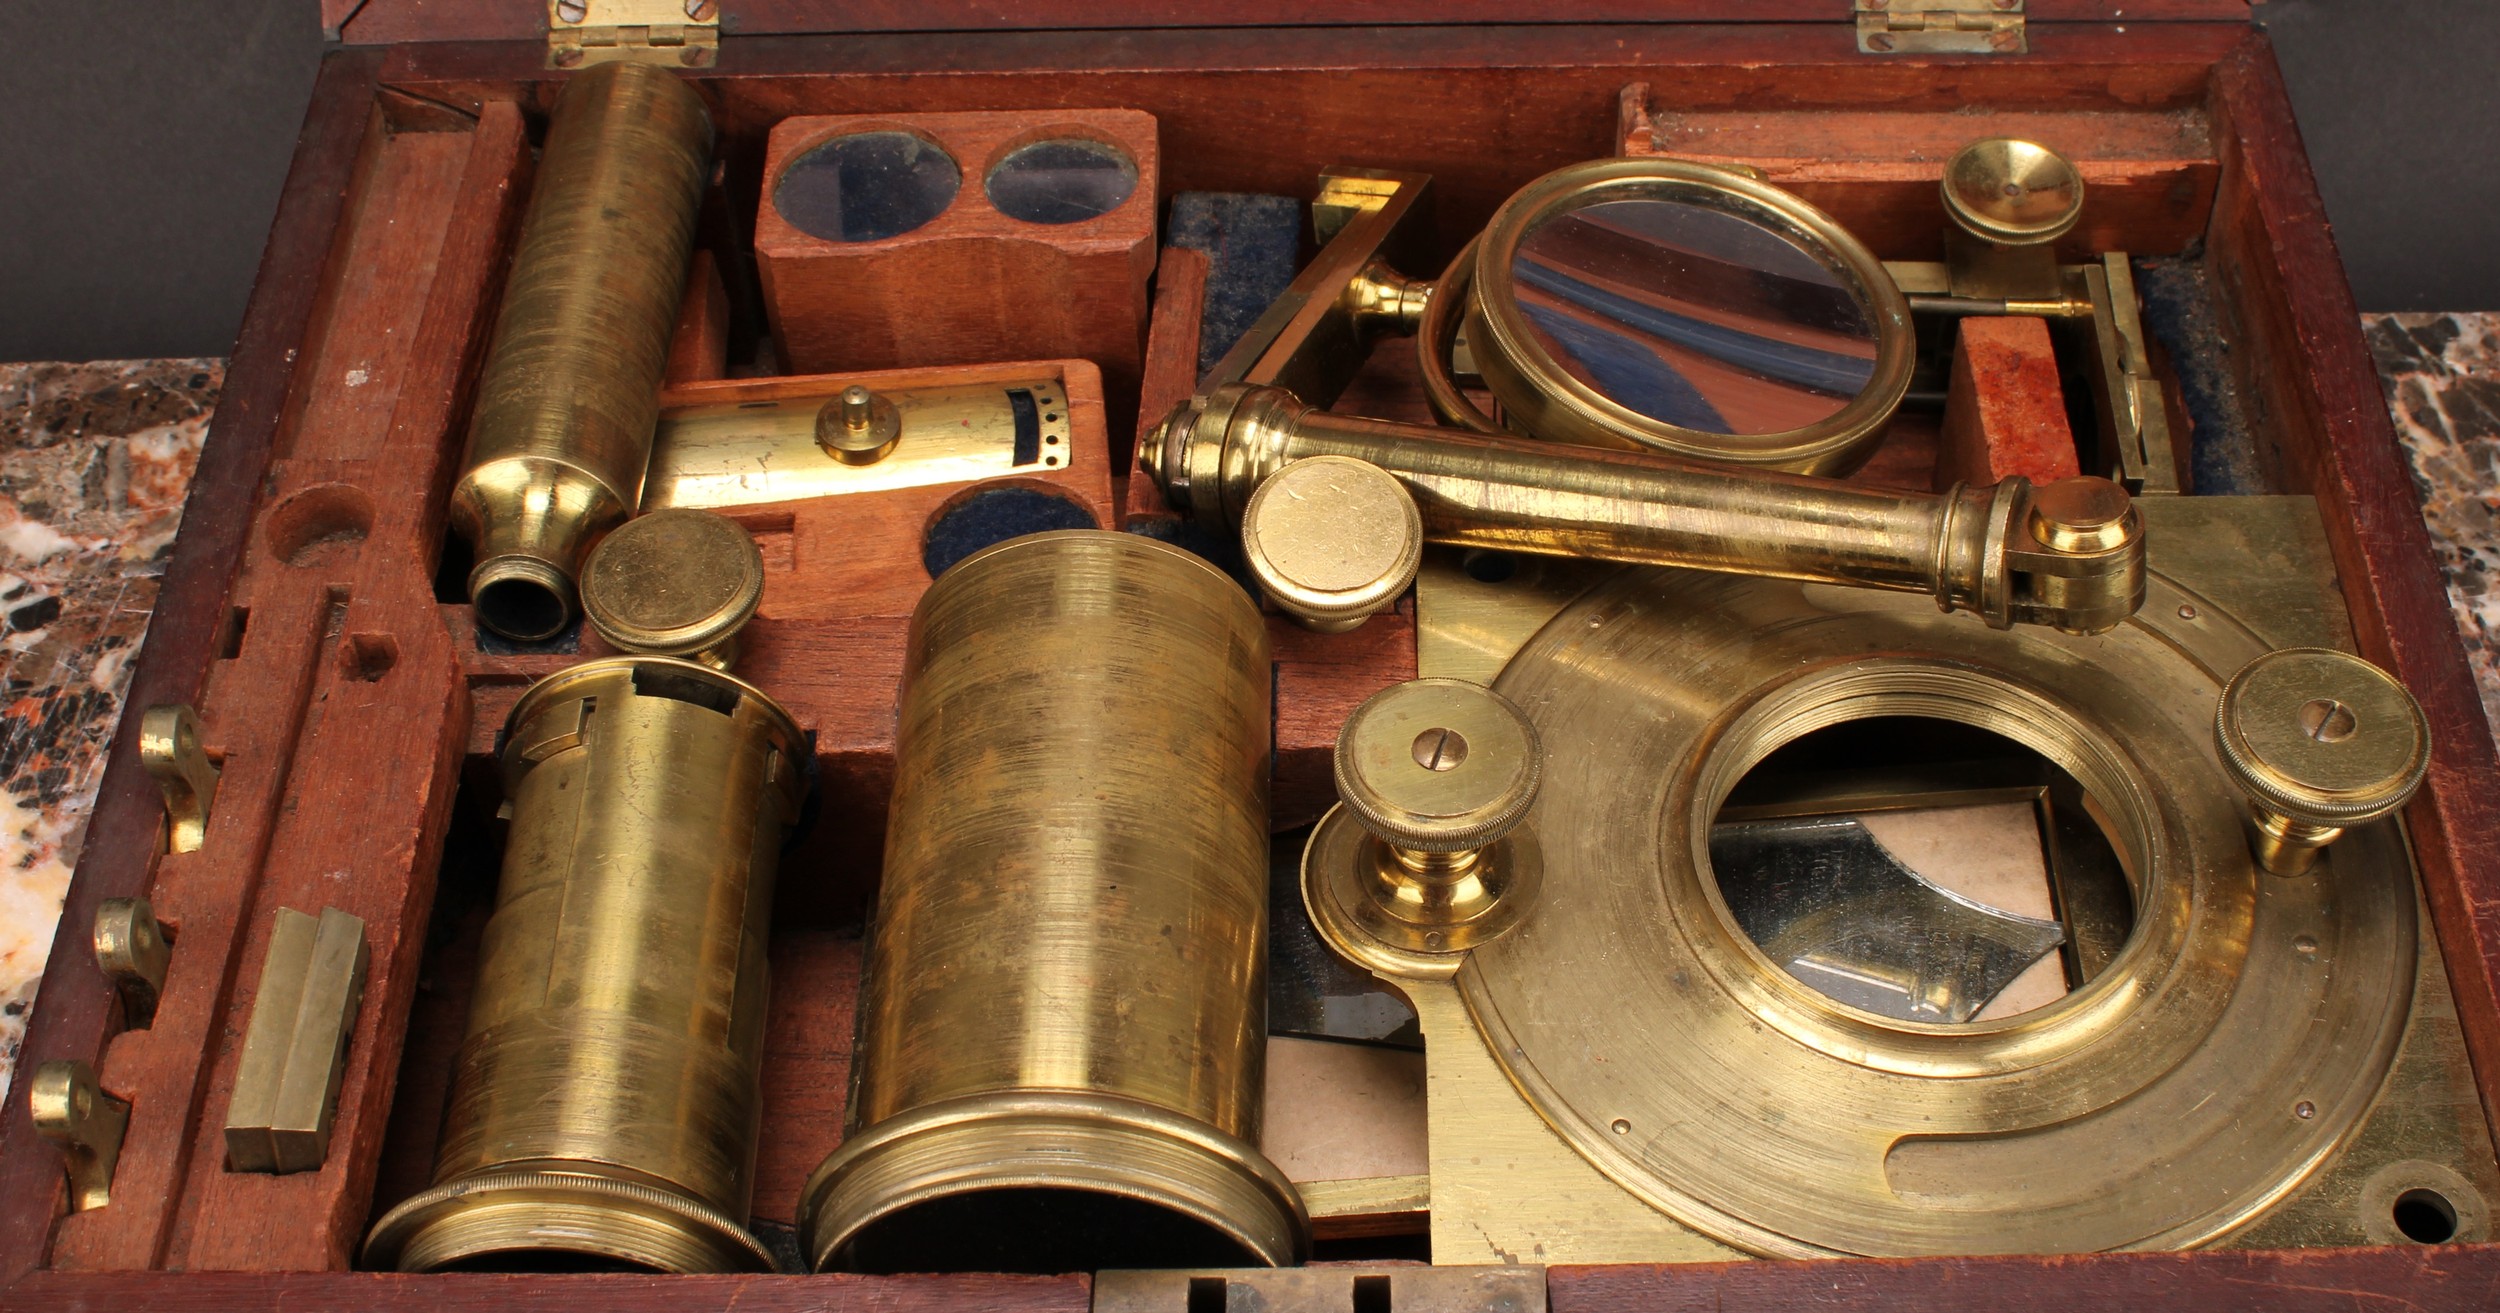 A George III lacquered brass solar microscope, two-part tube, rack and pinion focusing, long mirror, - Image 2 of 2